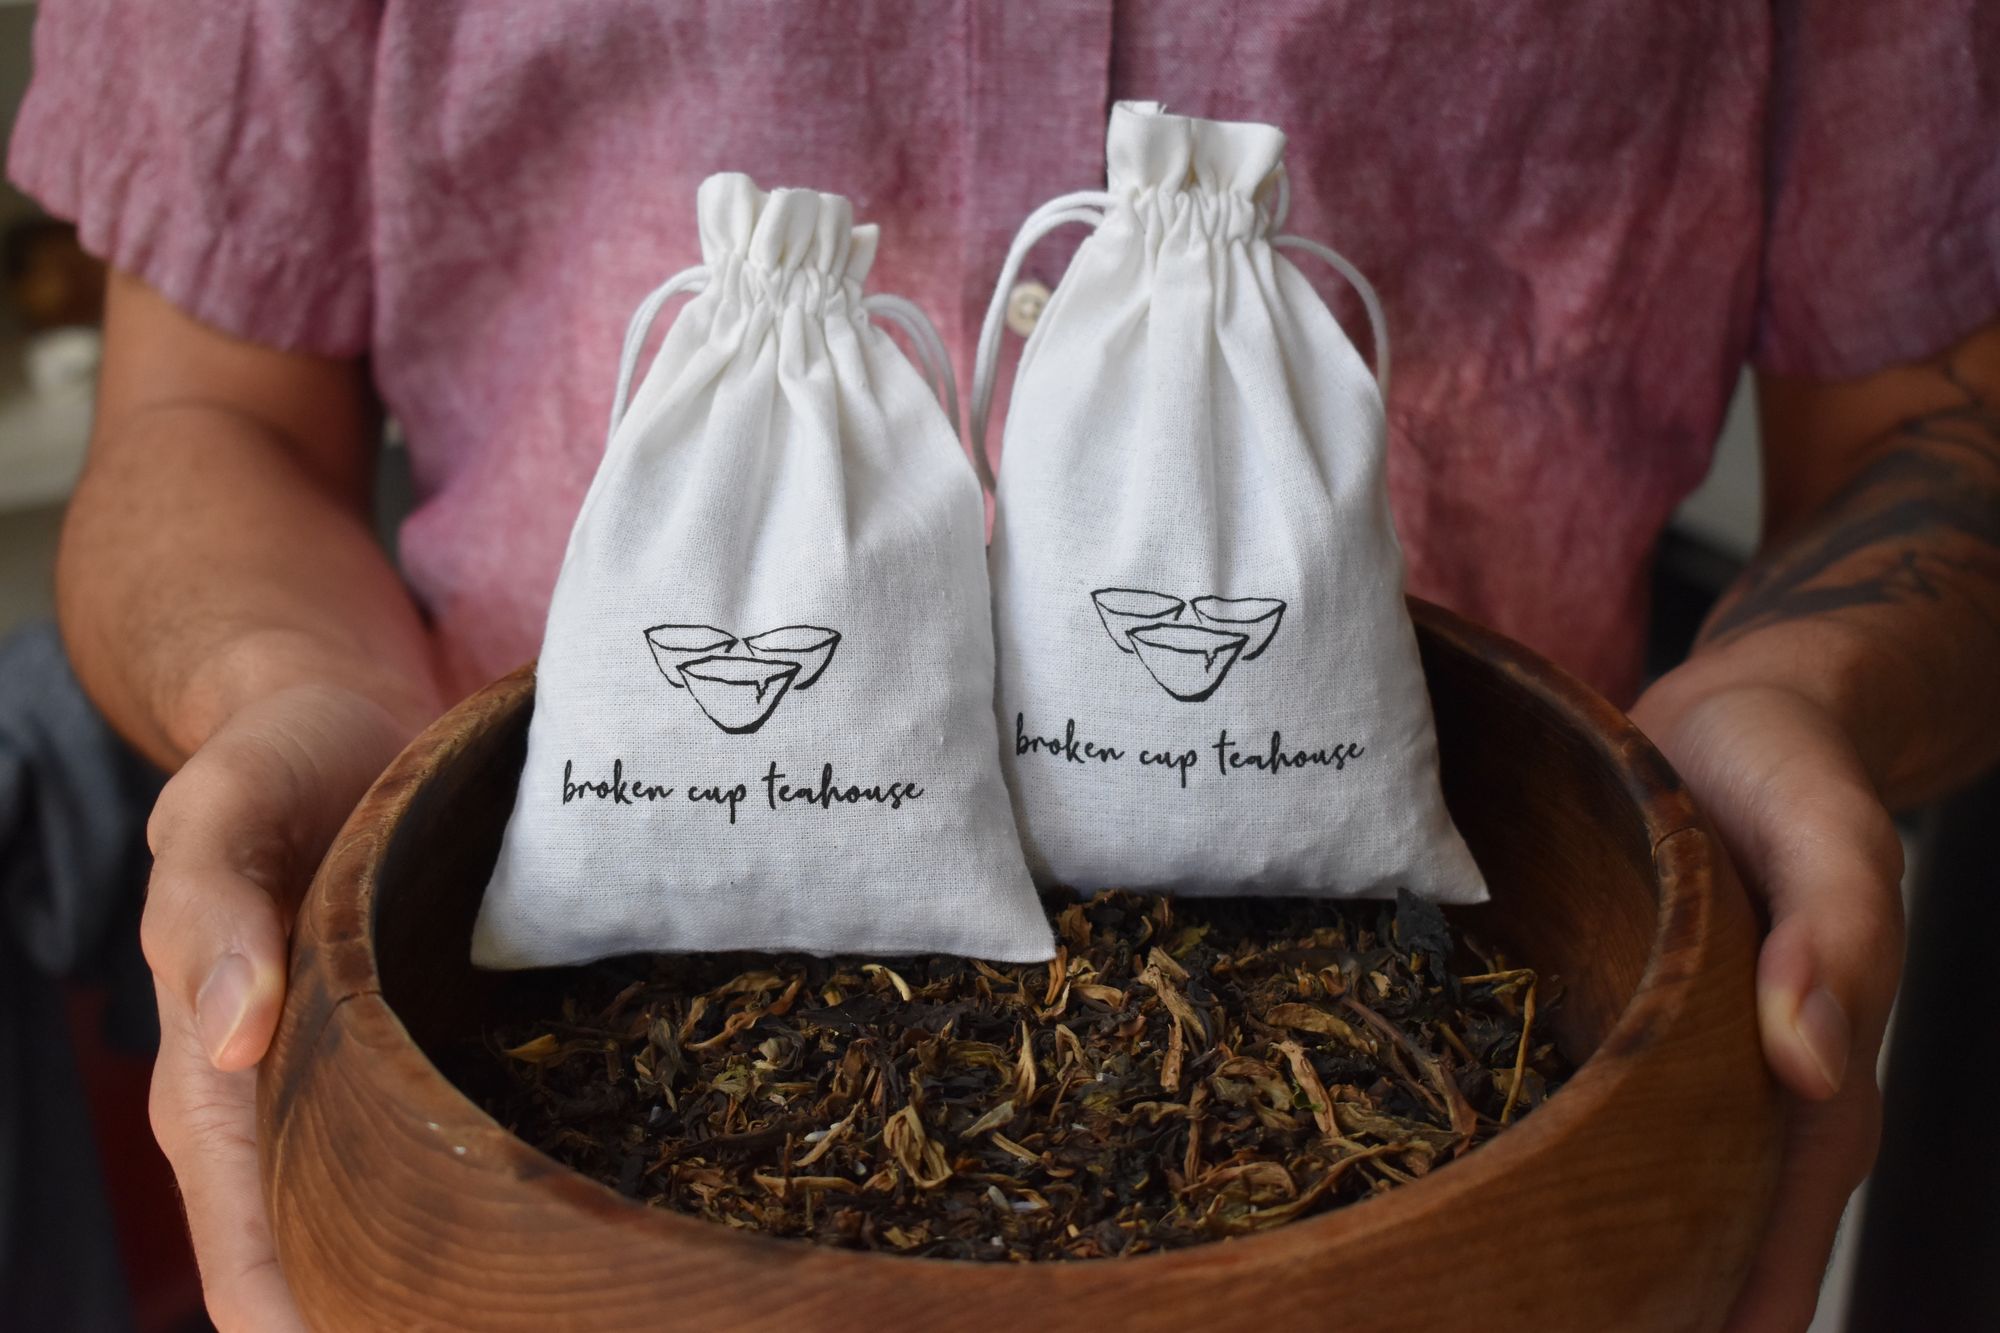 Our tea & lavender bath salt sachets contain only 4 simple and natural ingredients in a 100% cotton bag: Epsom salt, lavender essential oil, Ultra Blue grade lavender buds, and re-dried tea leaves.